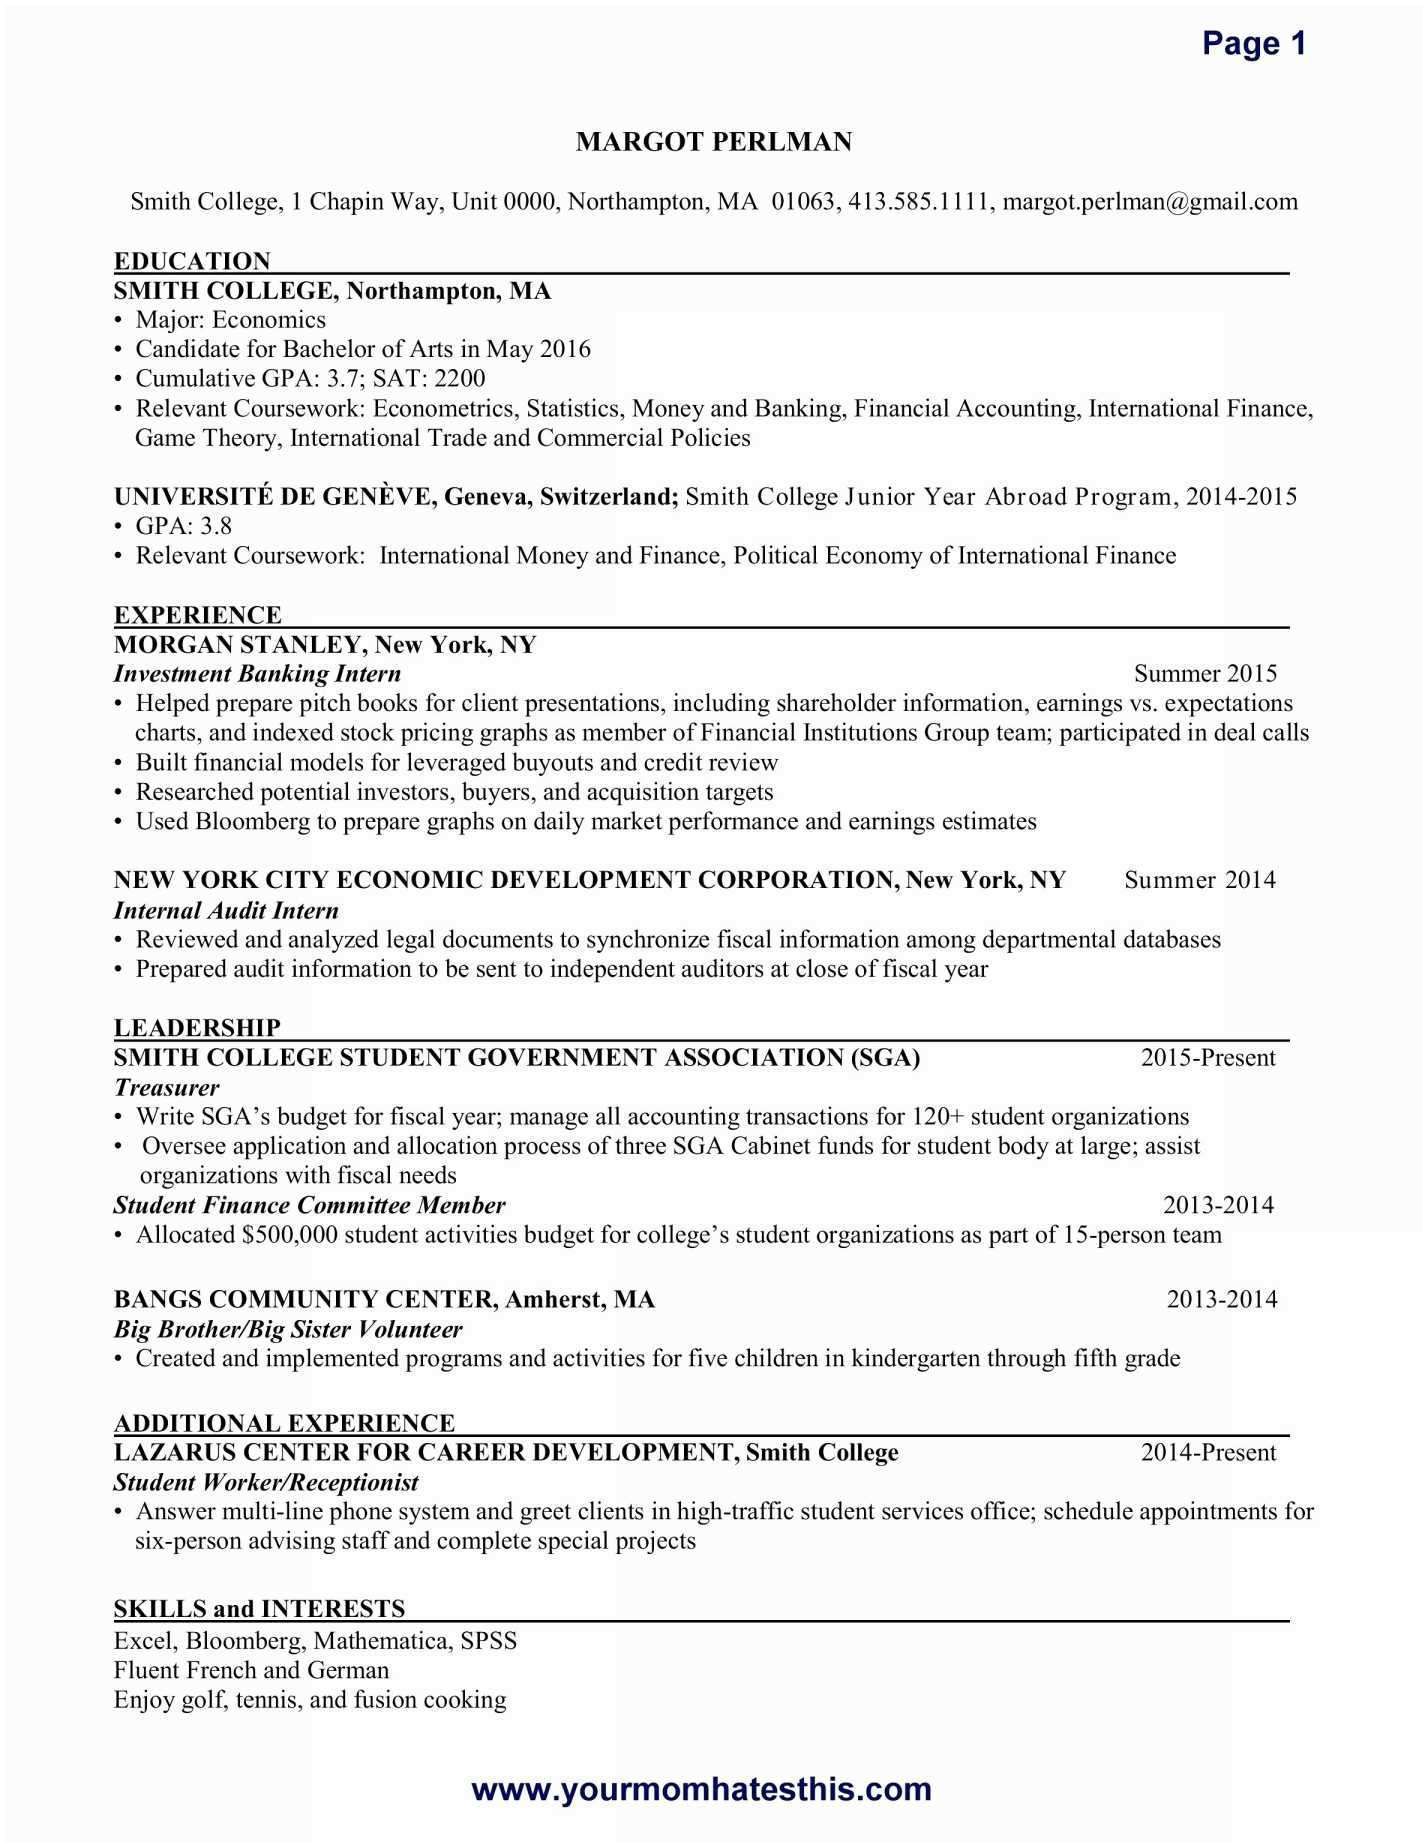 Free Resume Templates with Picture New Pr Resume Template Elegant Dictionary Template 0d Archives Free Best 25 Small Business